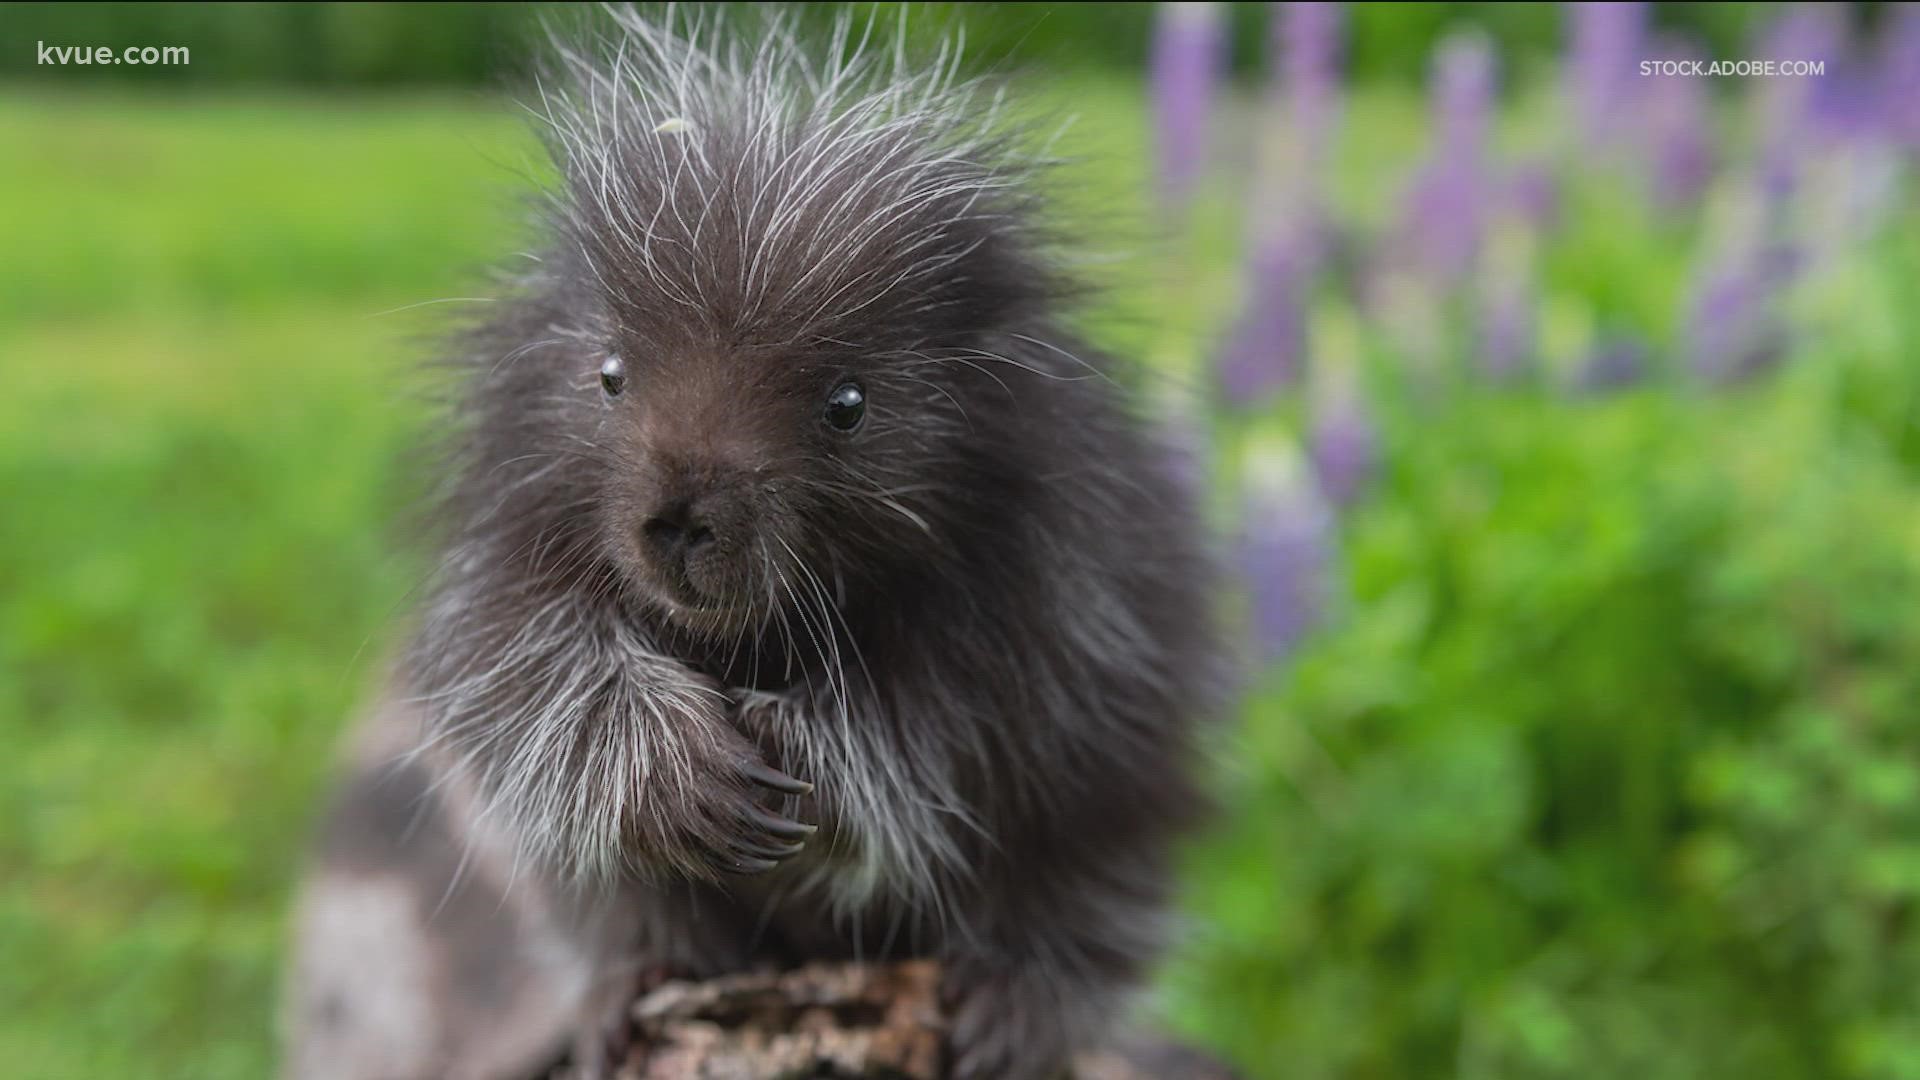 Porcupines are making their way into Central Texas. Texas Parks and Wildlife officials say biologists have noticed the spiky animals moving eastward.